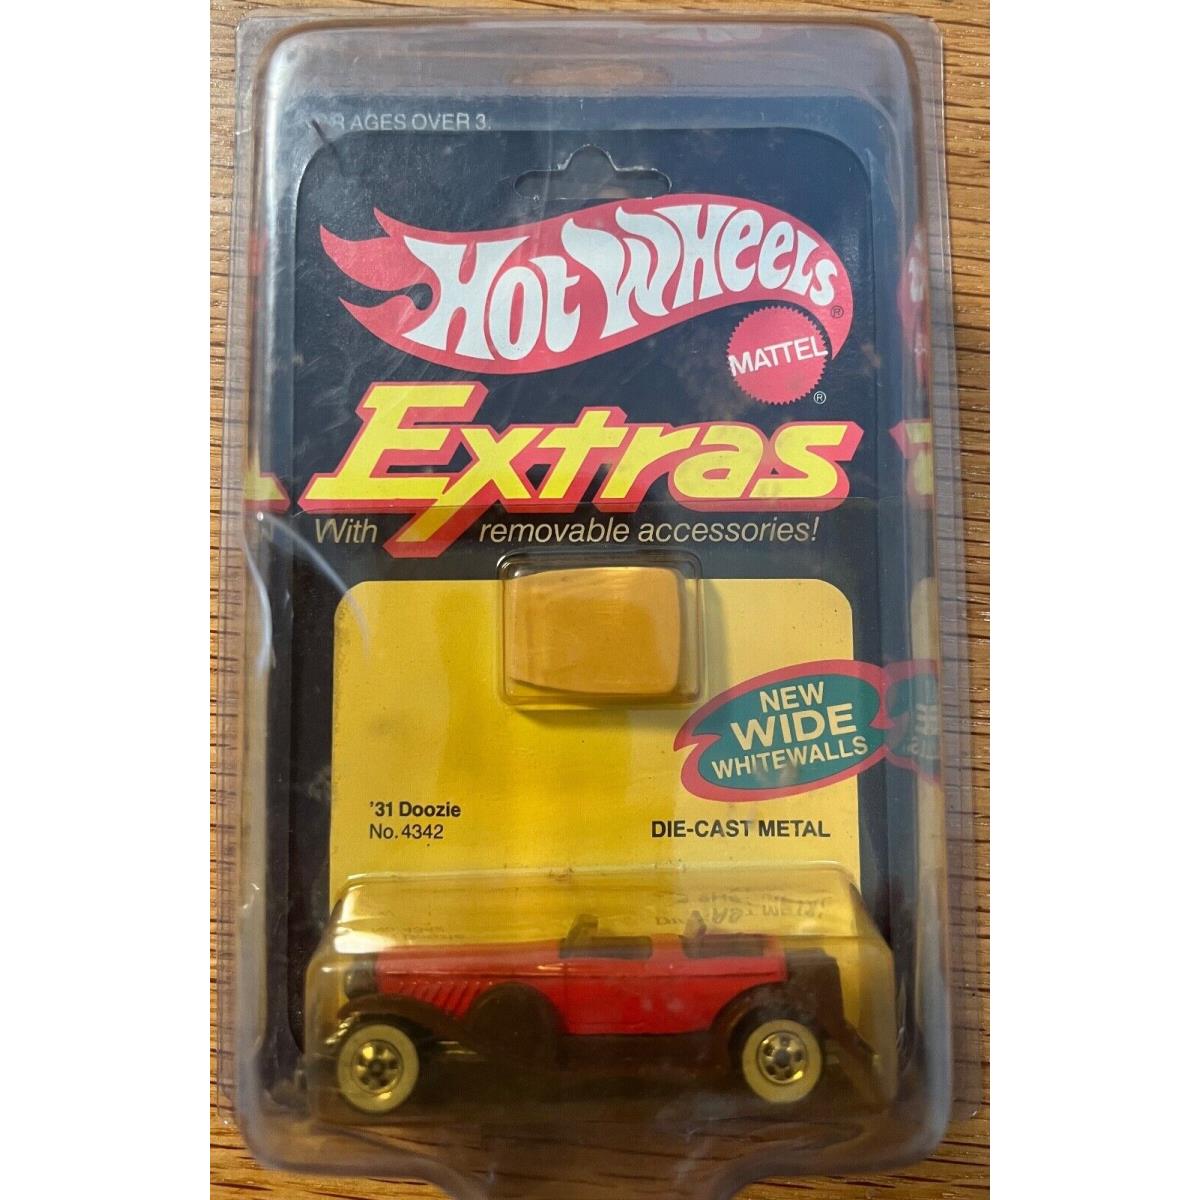 Hot Wheels 31 Doozie 1931 NO 4342 1982 Extras Removable Accessories